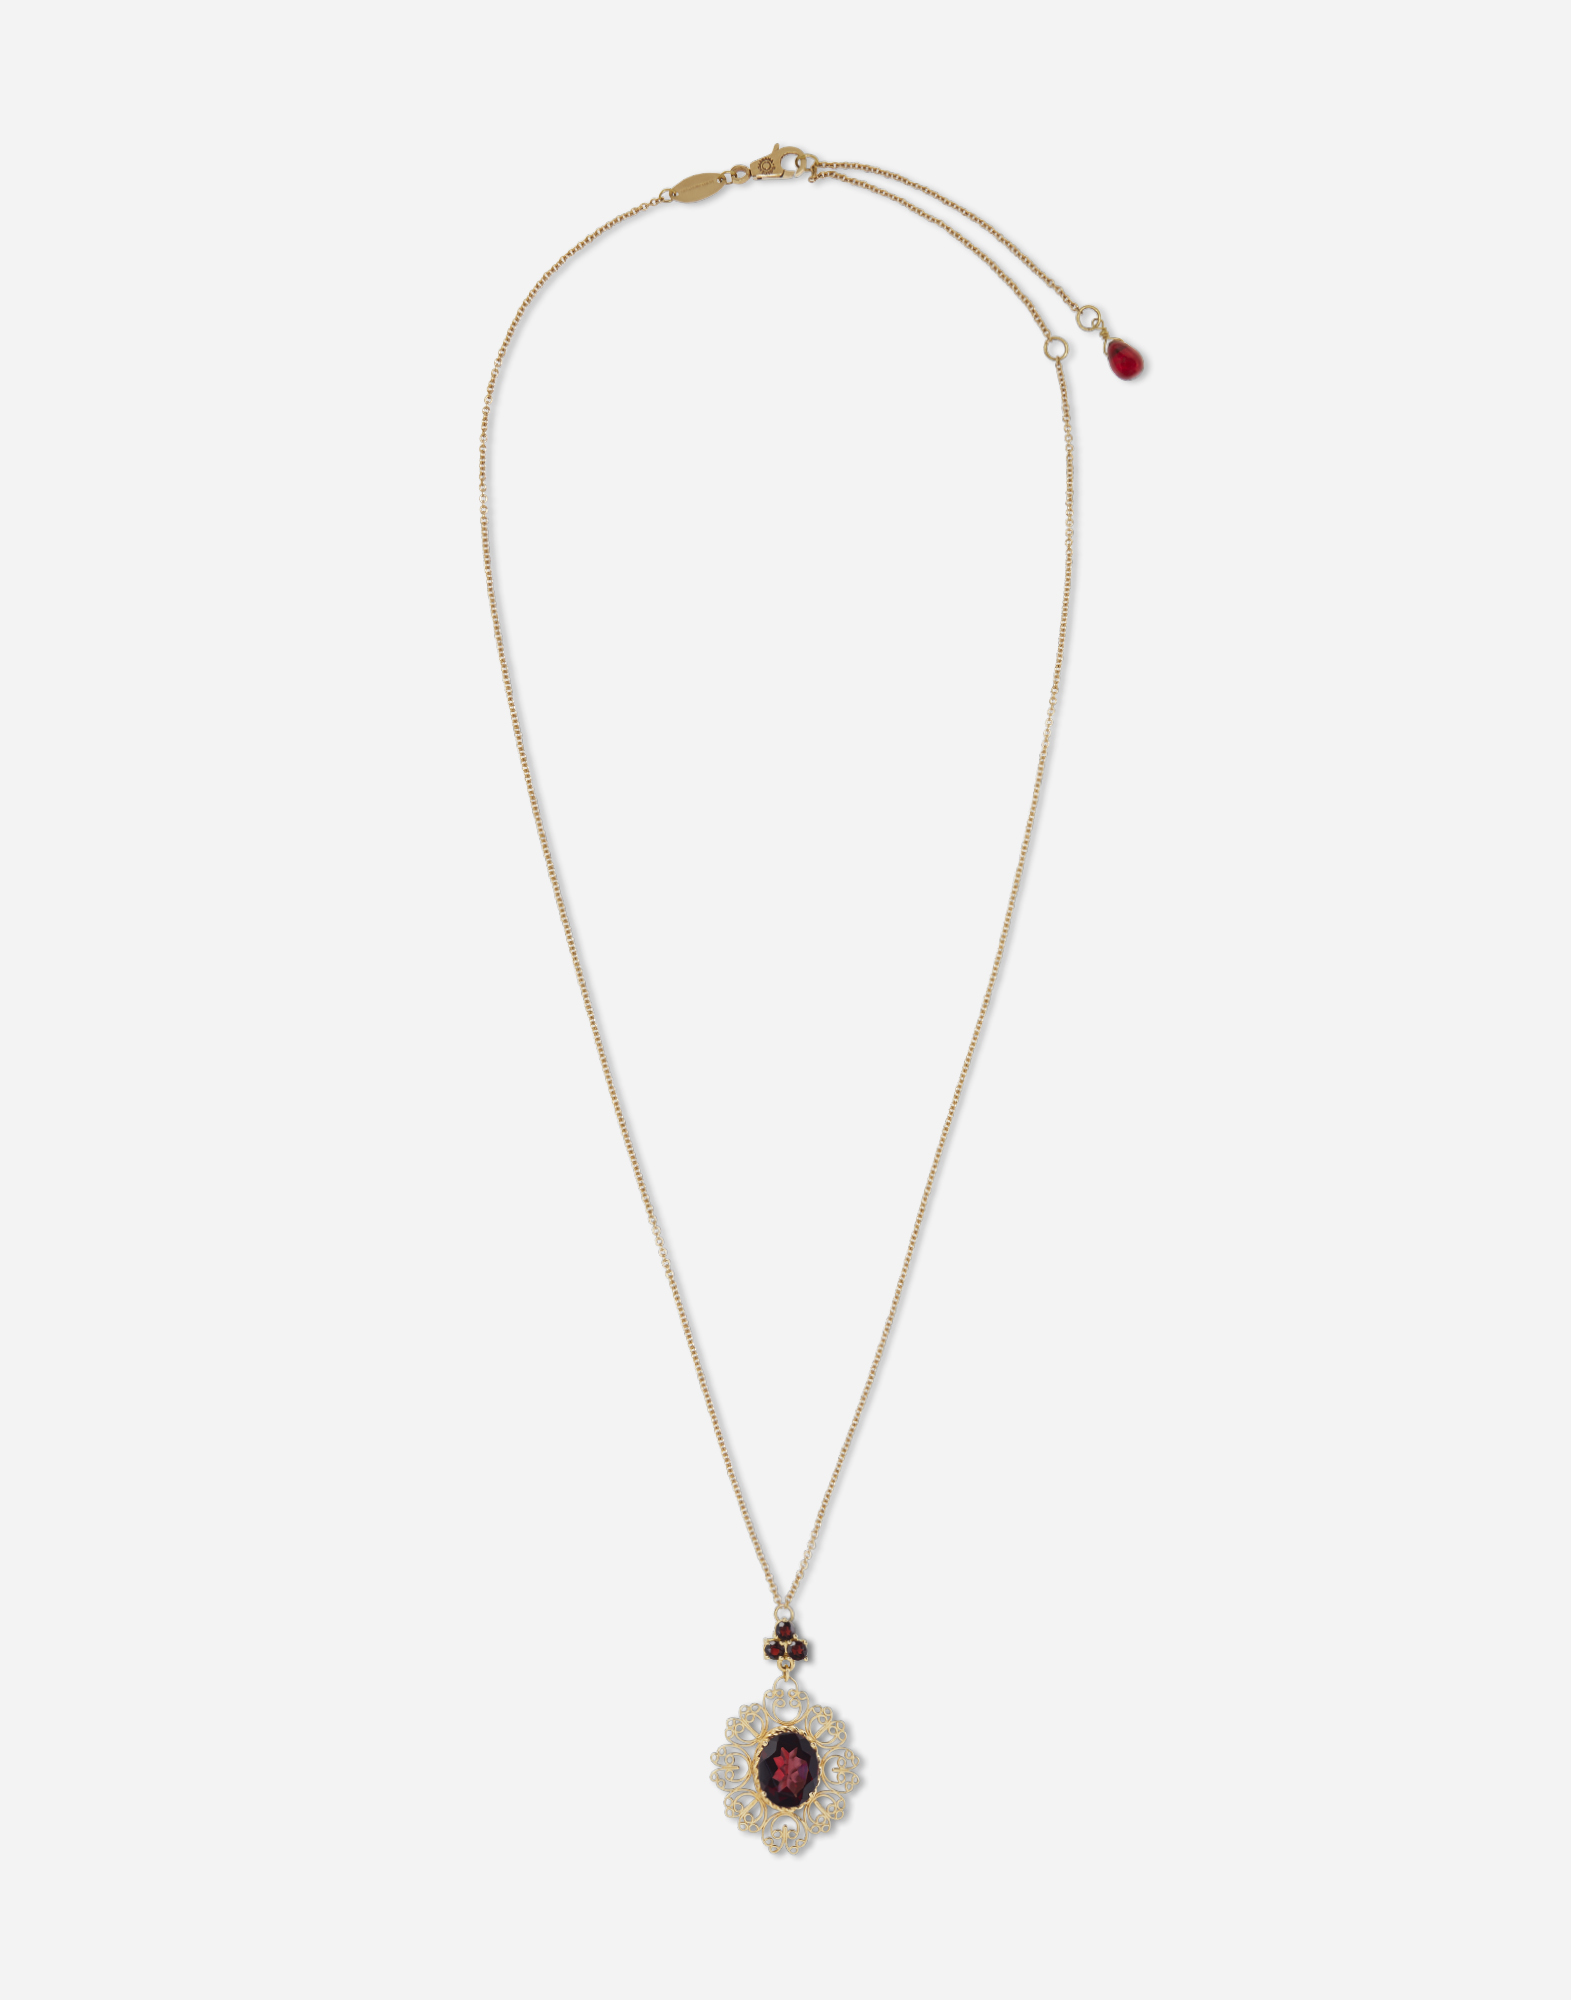 Barocco pendant in yellow gold with rhodolite garanets in Gold